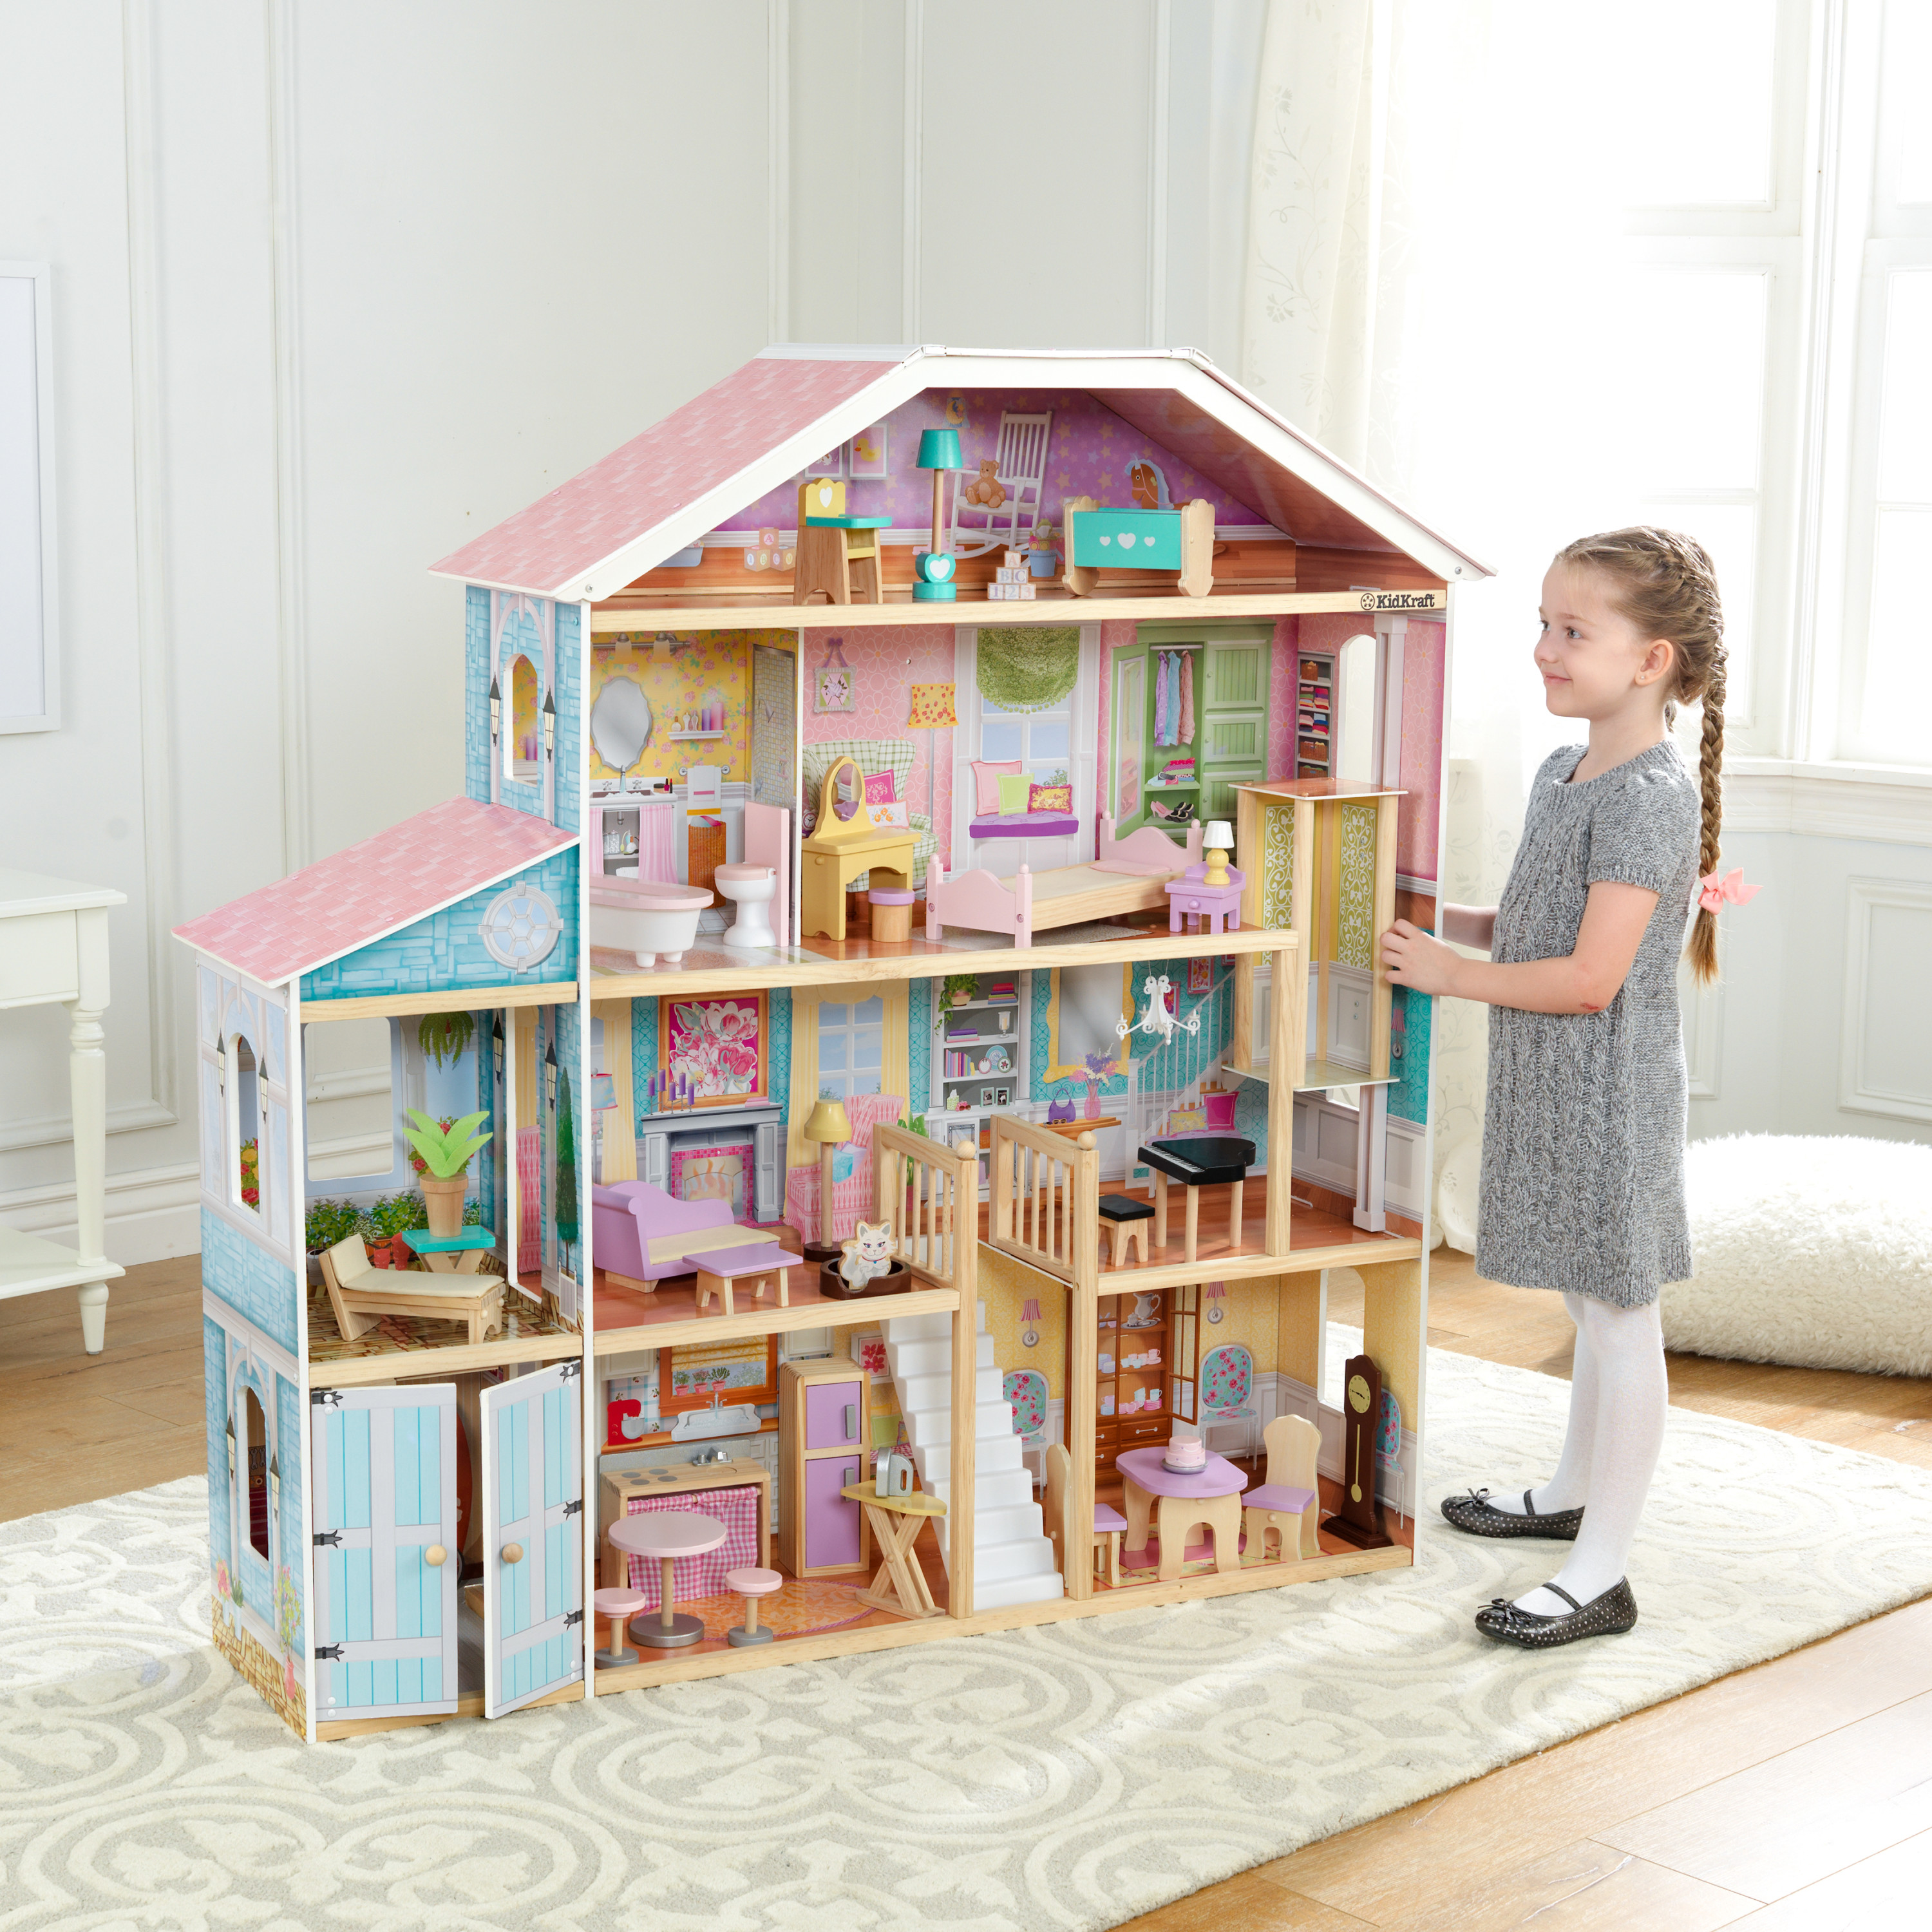 KidKraft Grand View Mansion Wooden Dollhouse with 34 Accessories, Ages 3 and up - image 3 of 14